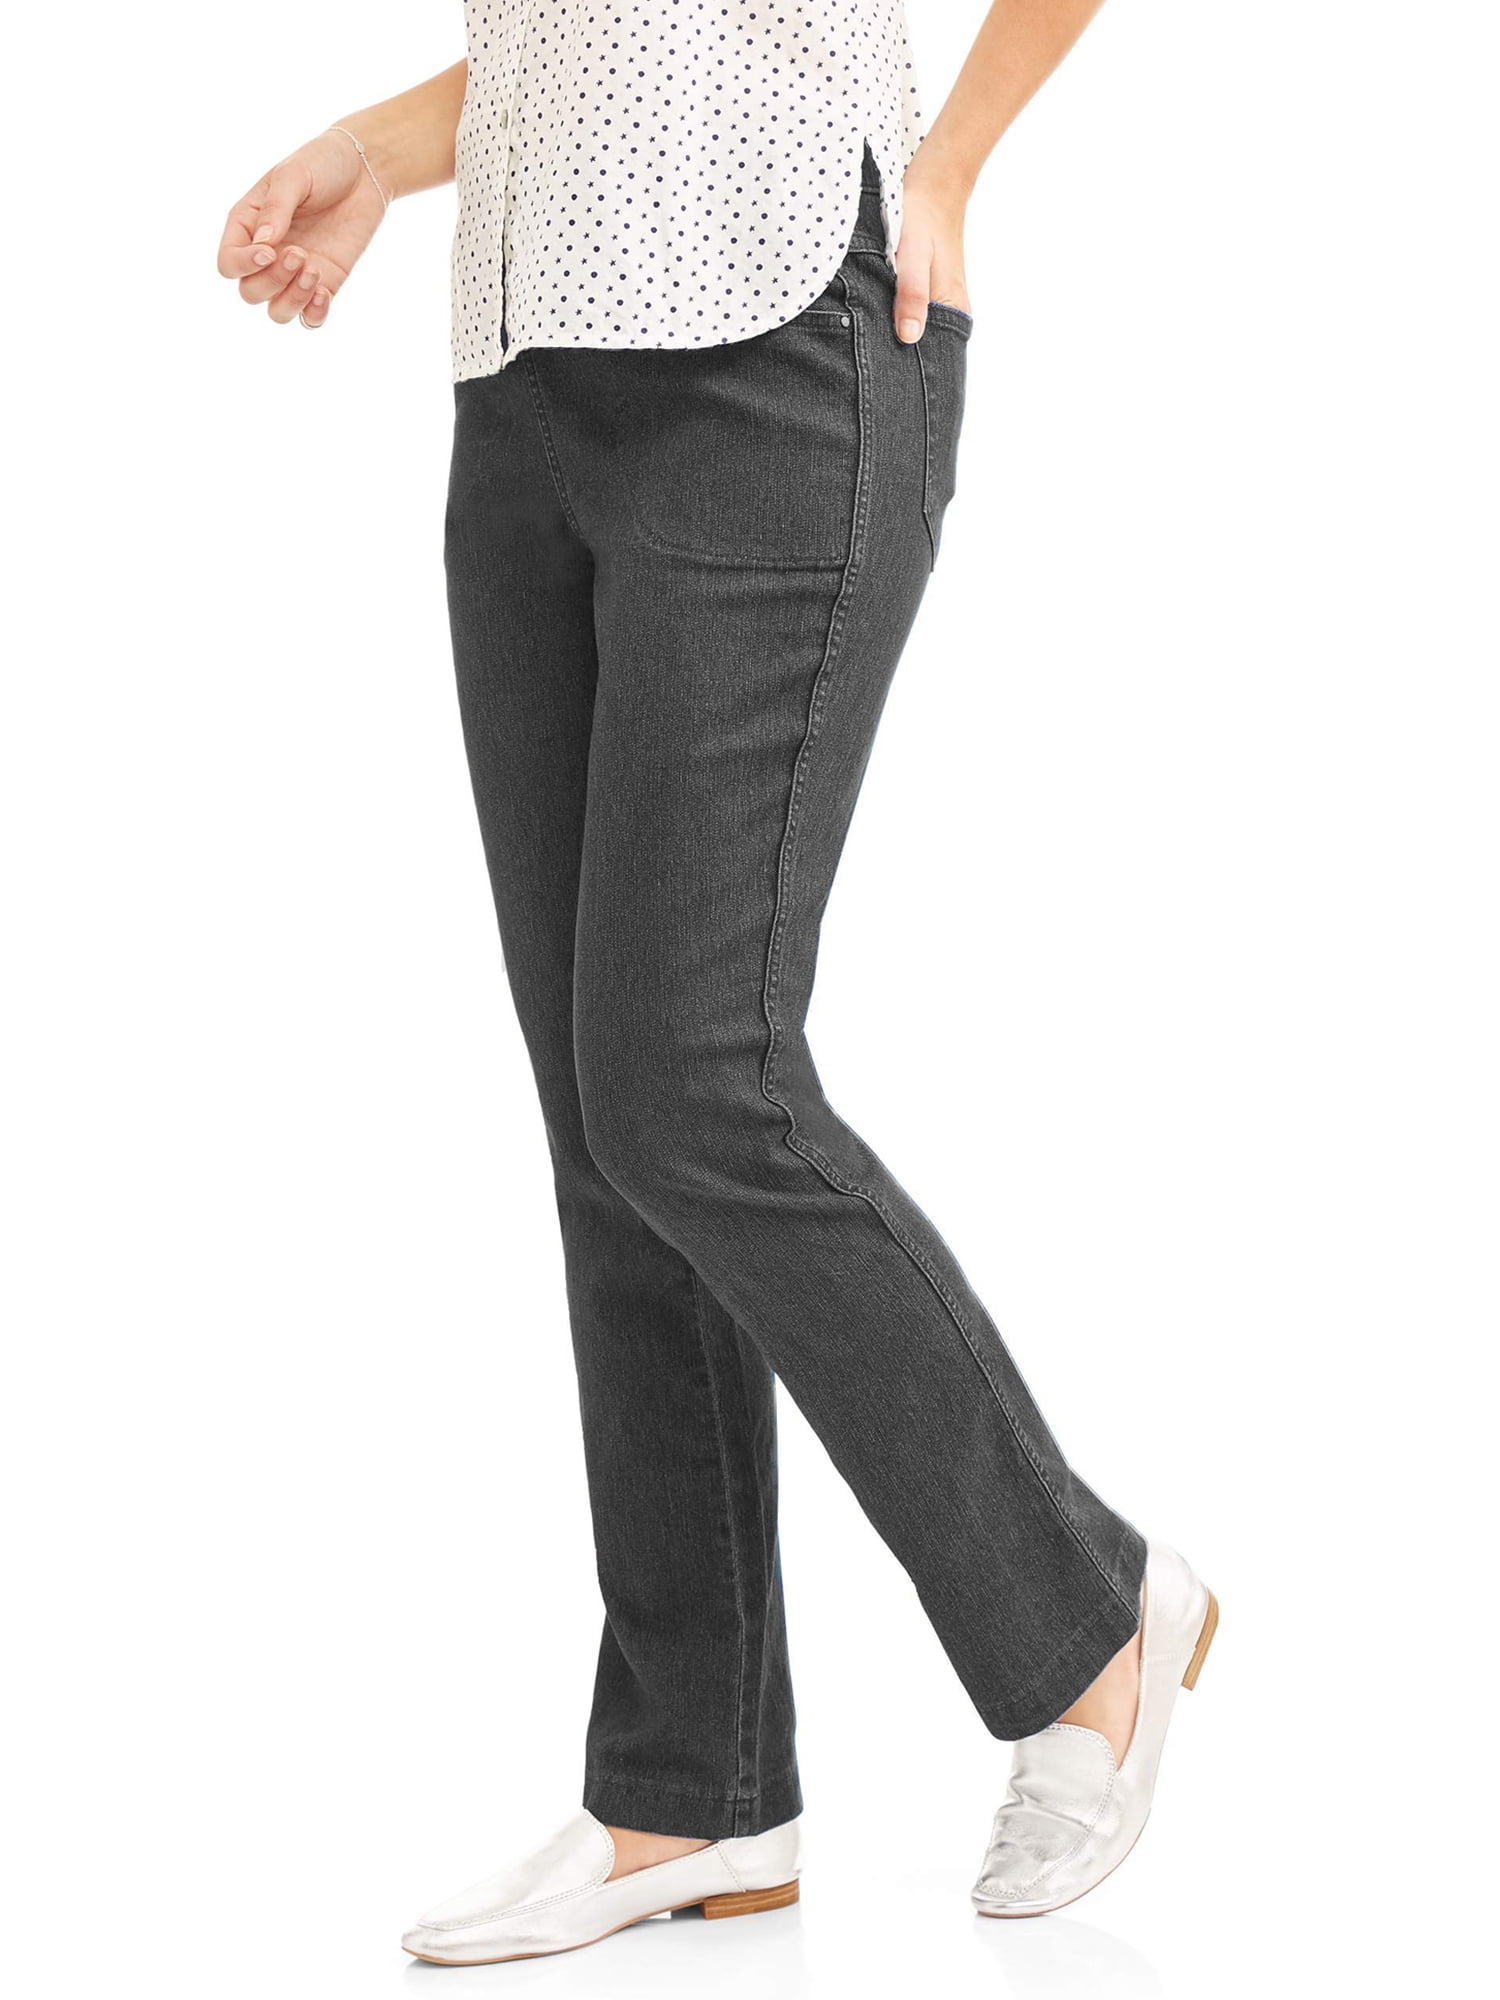 Bootcut Jeans for Women, Bootcut Stretch Jeans